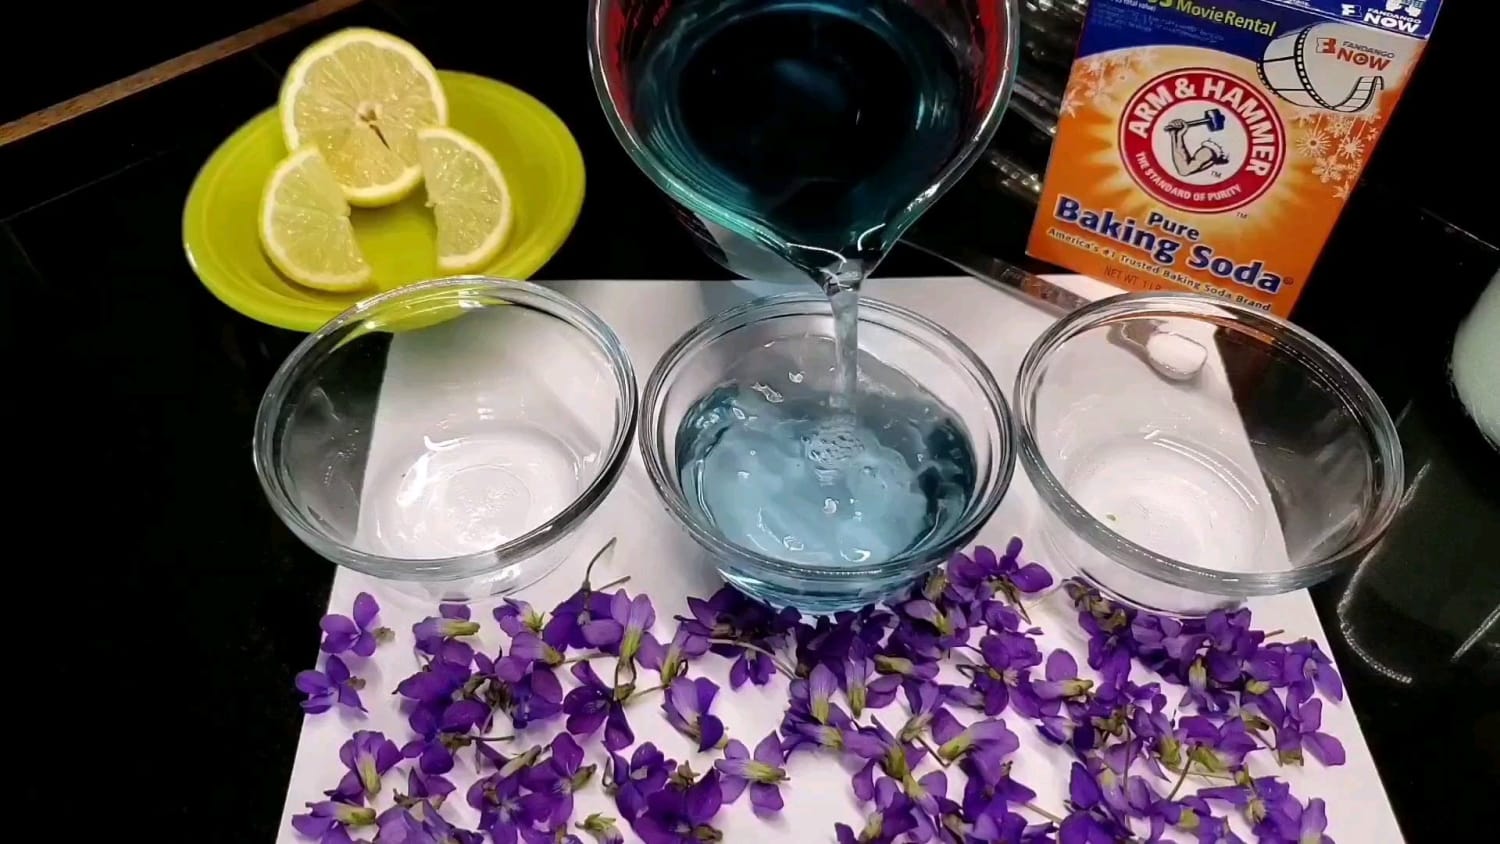 Many blue or purple flowers contain pigments known as anthocyanins. These compounds change color depending on the pH of the solution they are in. Here's a simple demonstration with some wild violets from my yard.